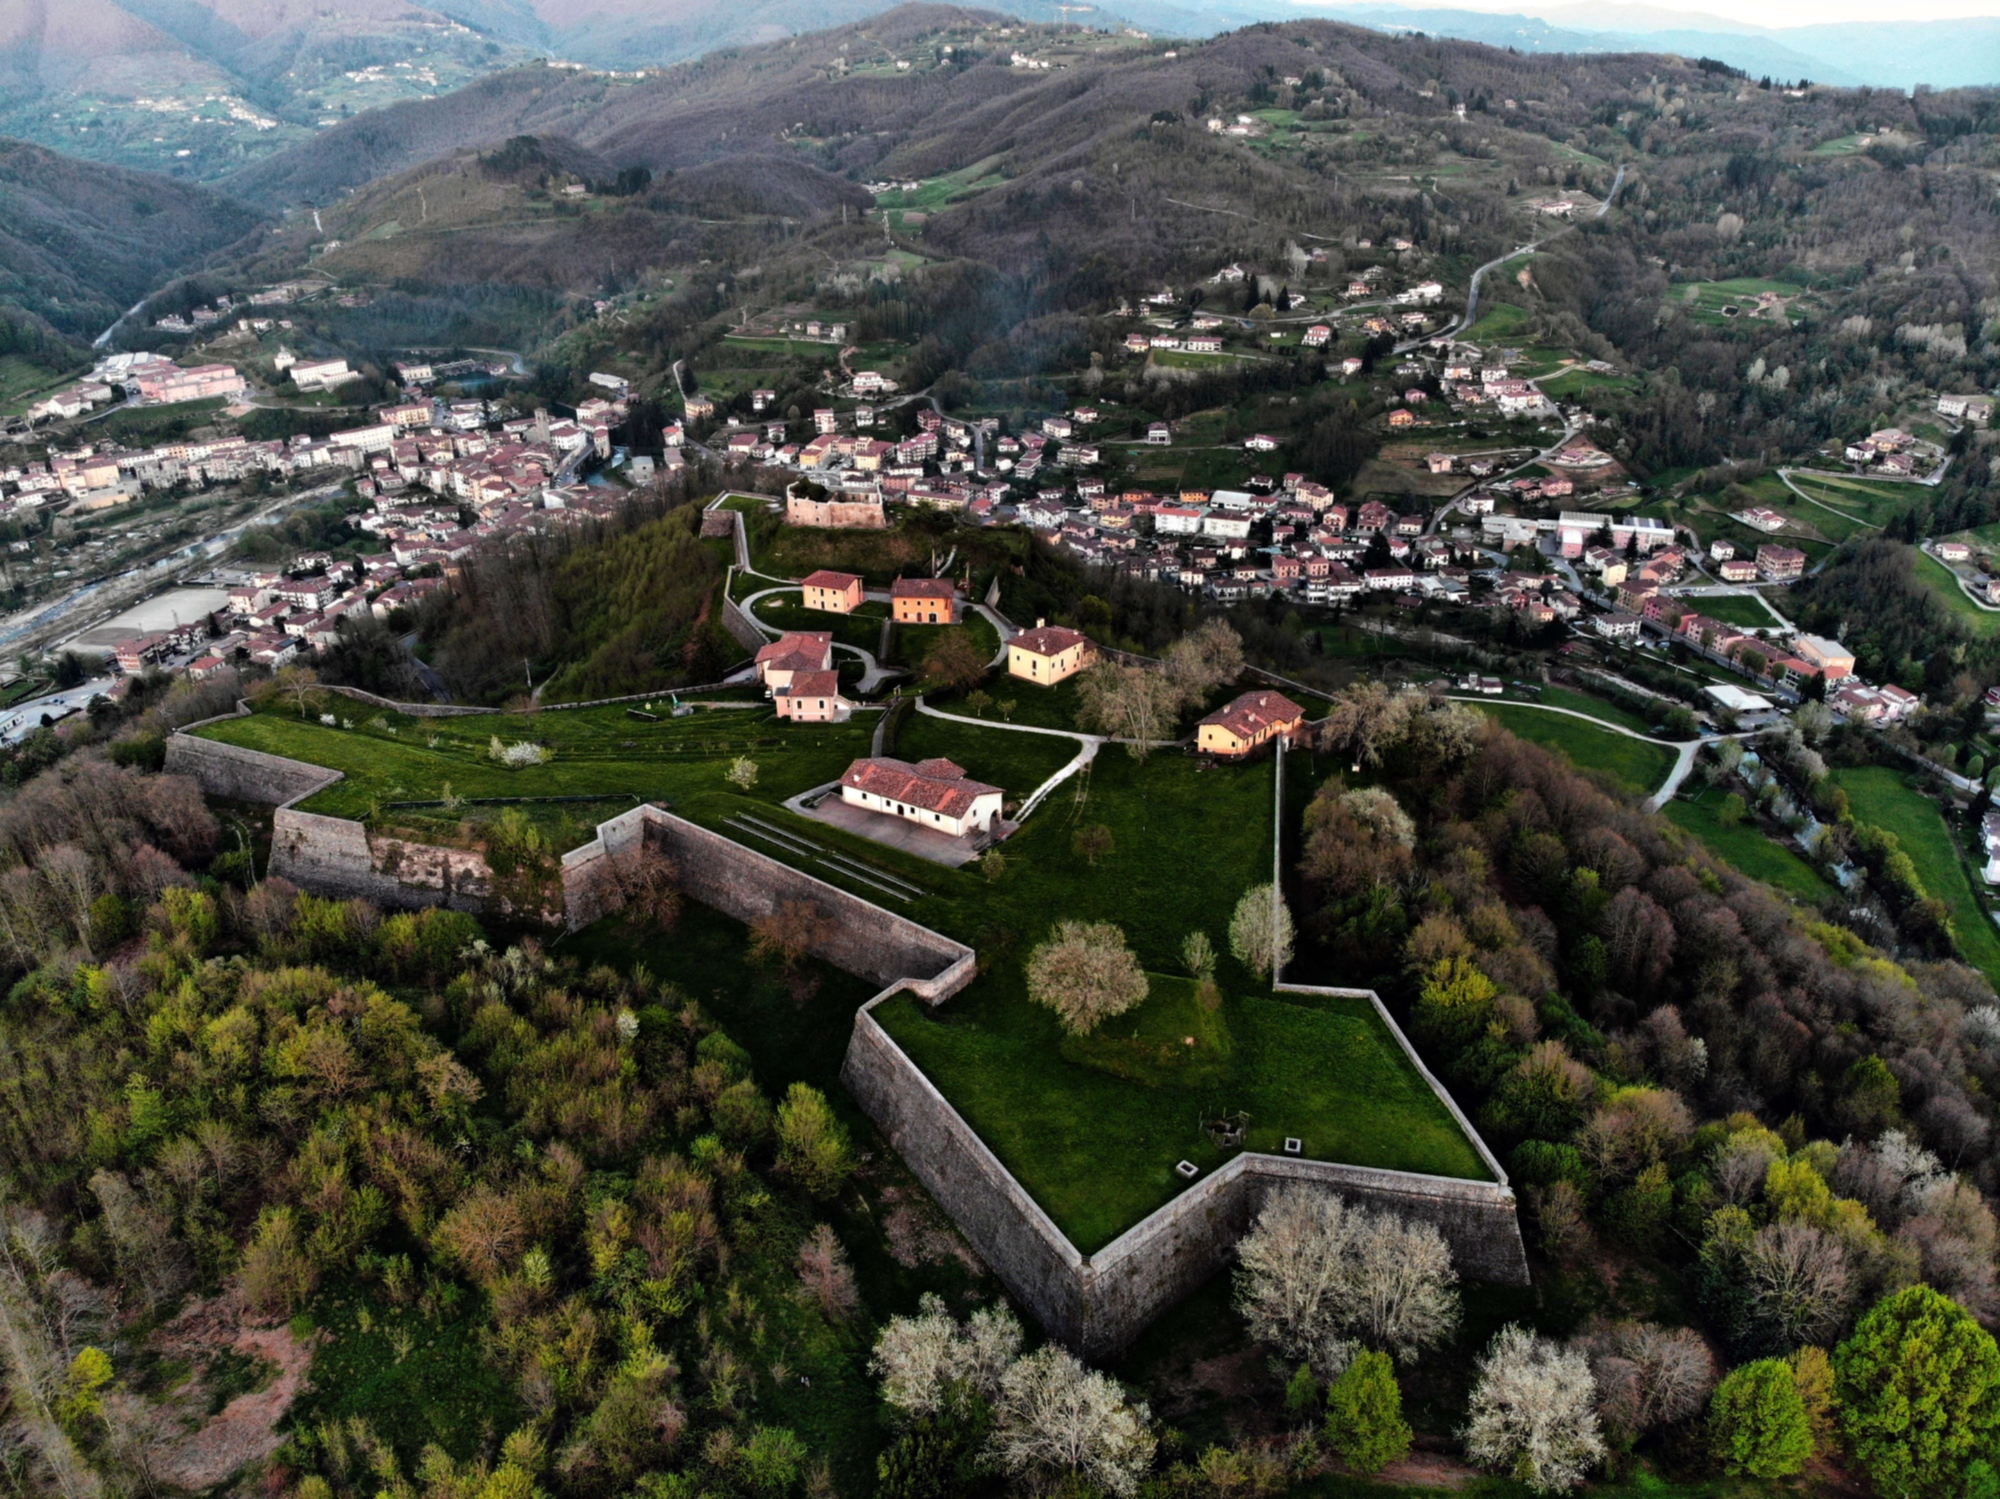 View from the top of the Fortress of Mont'Alfonso